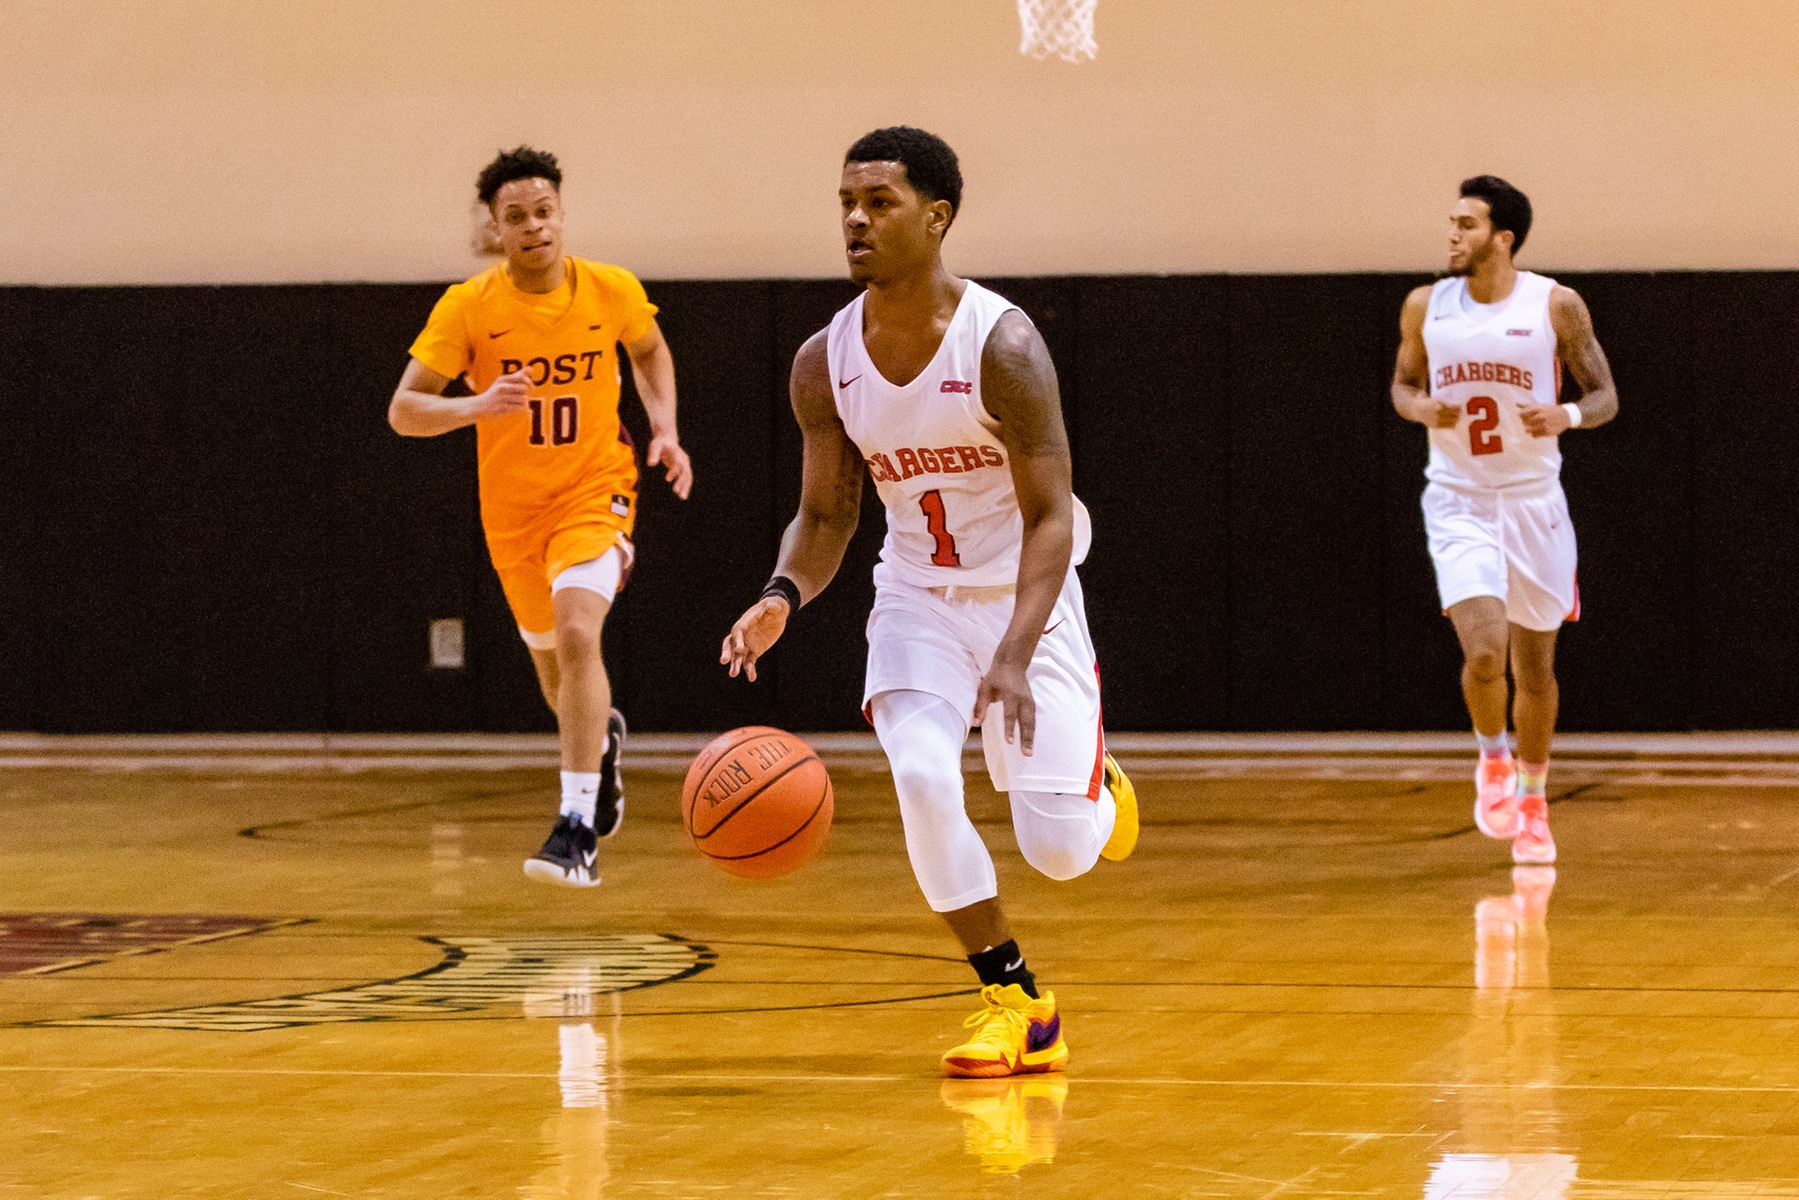 DOMINICAN BASKETBALL TOPS UNIVERSITY OF THE SCIENCES